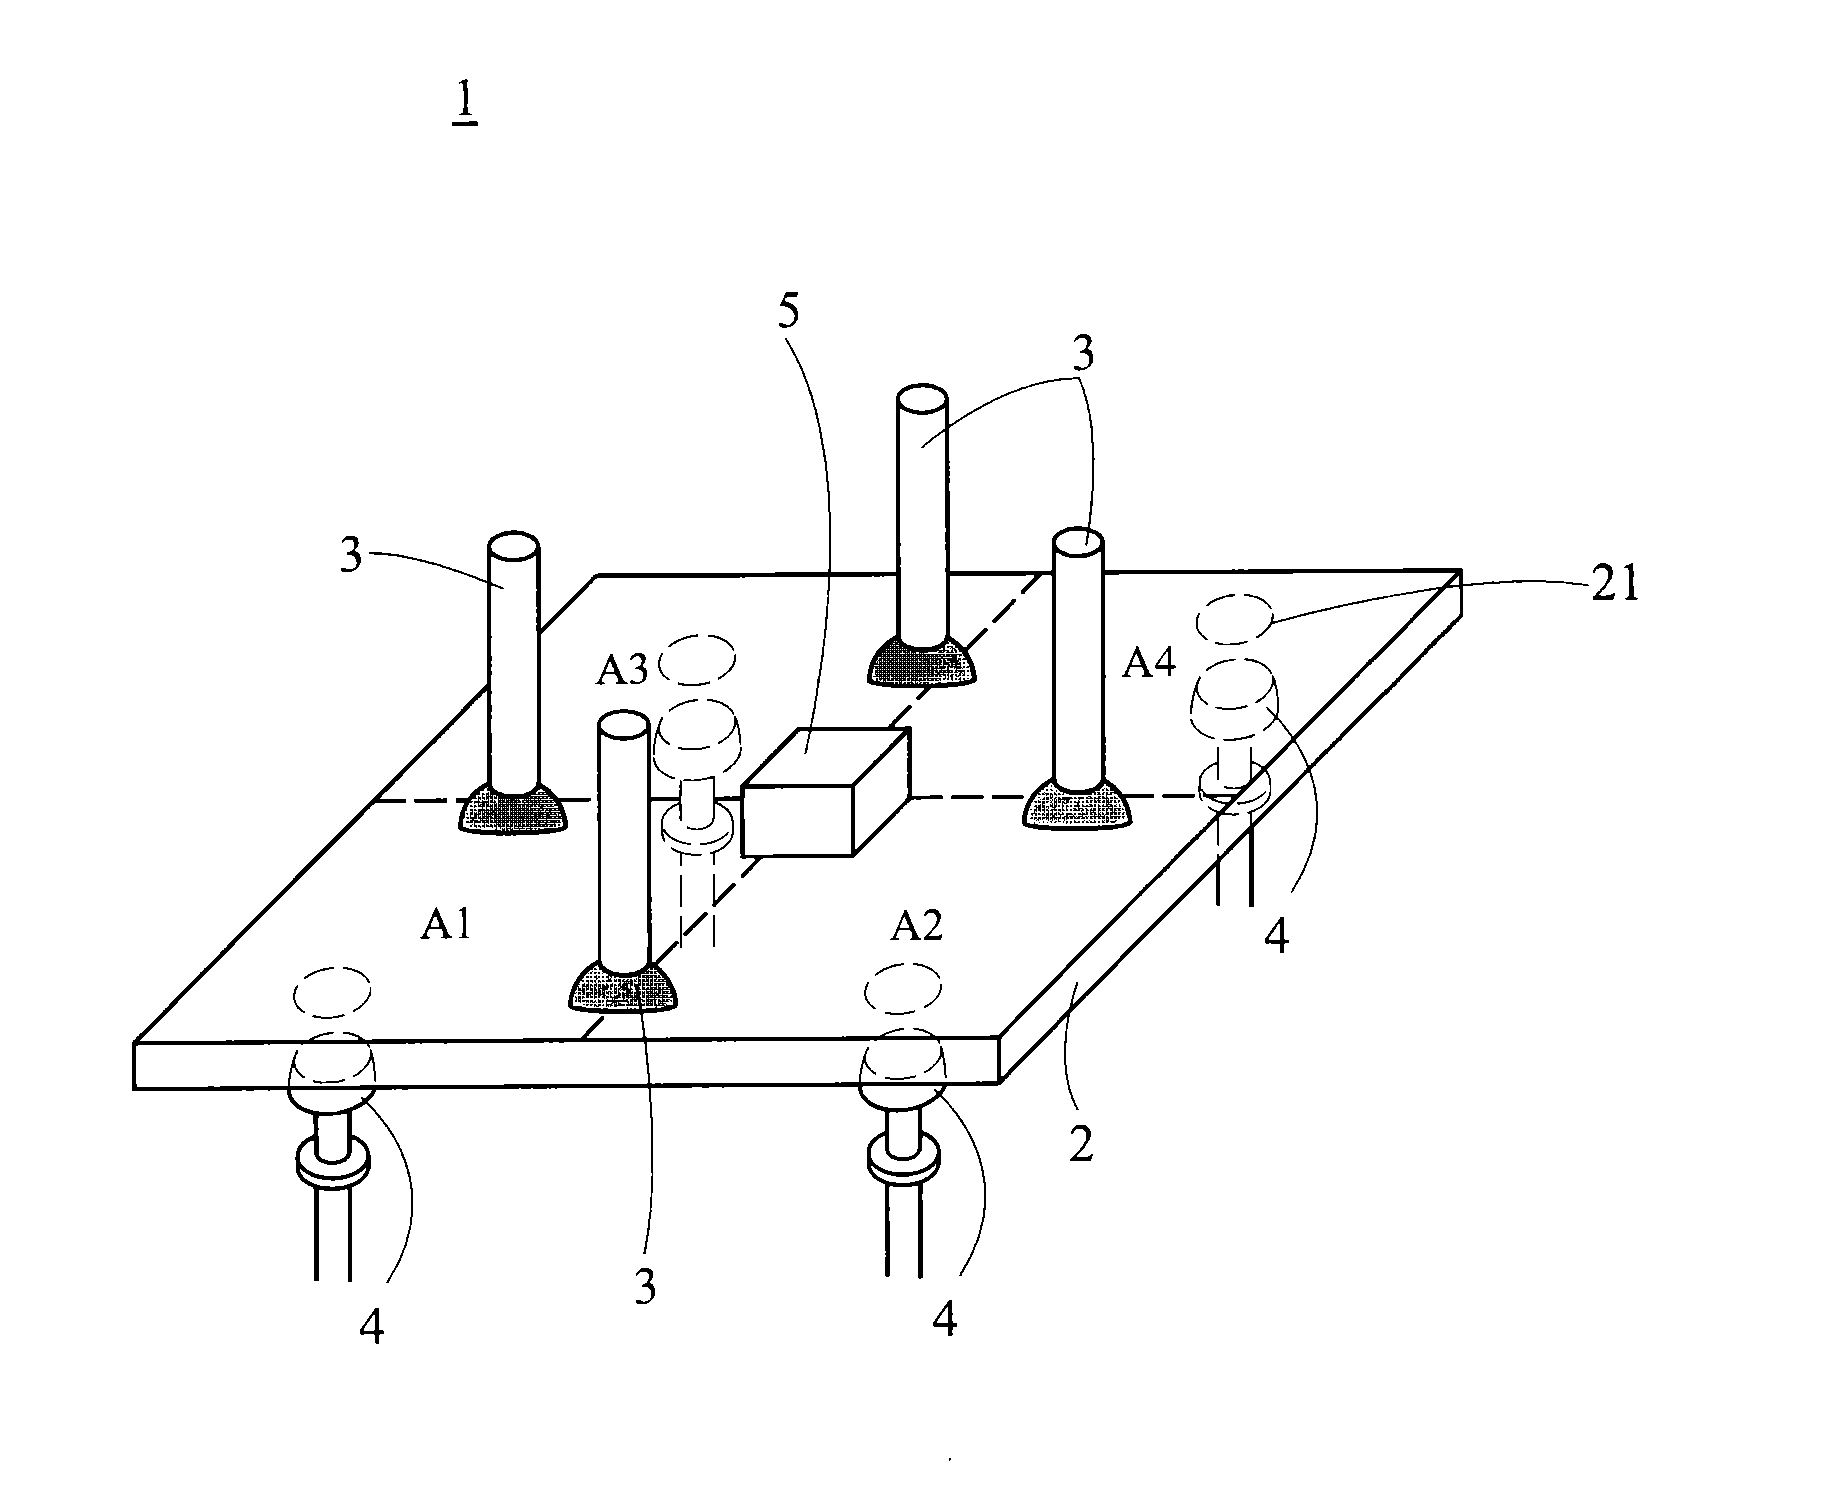 Apparatus and Method for Testing Solar Panel